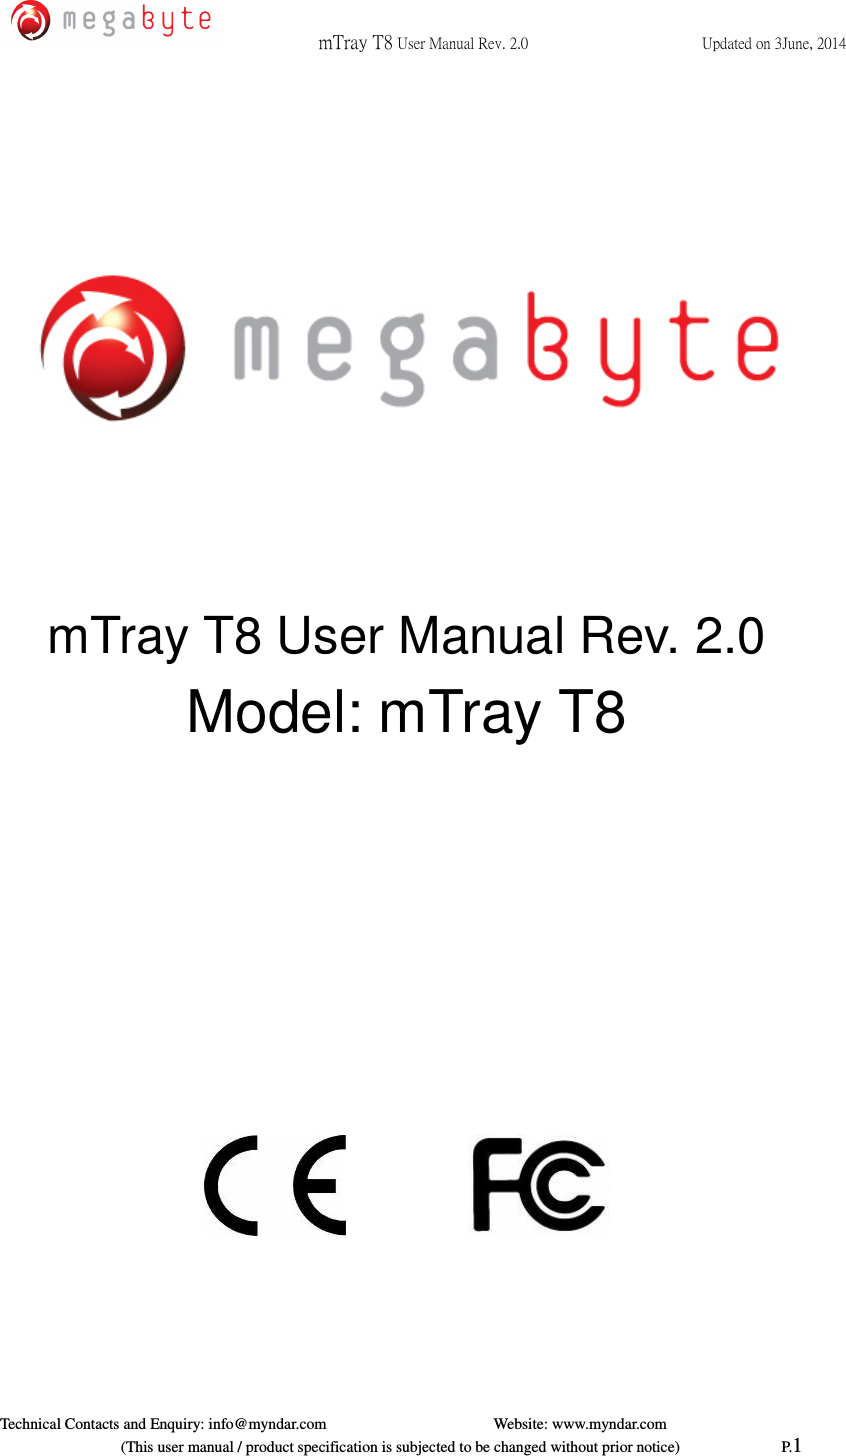  mTray T8 User Manual Rev. 2.0  Updated on 3June, 2014     Technical Contacts and Enquiry: info@myndar.com         Website: www.myndar.com                             (This user manual / product specification is subjected to be changed without prior notice)                          P.1           mTray T8 User Manual Rev. 2.0 Model: mTray T8                            